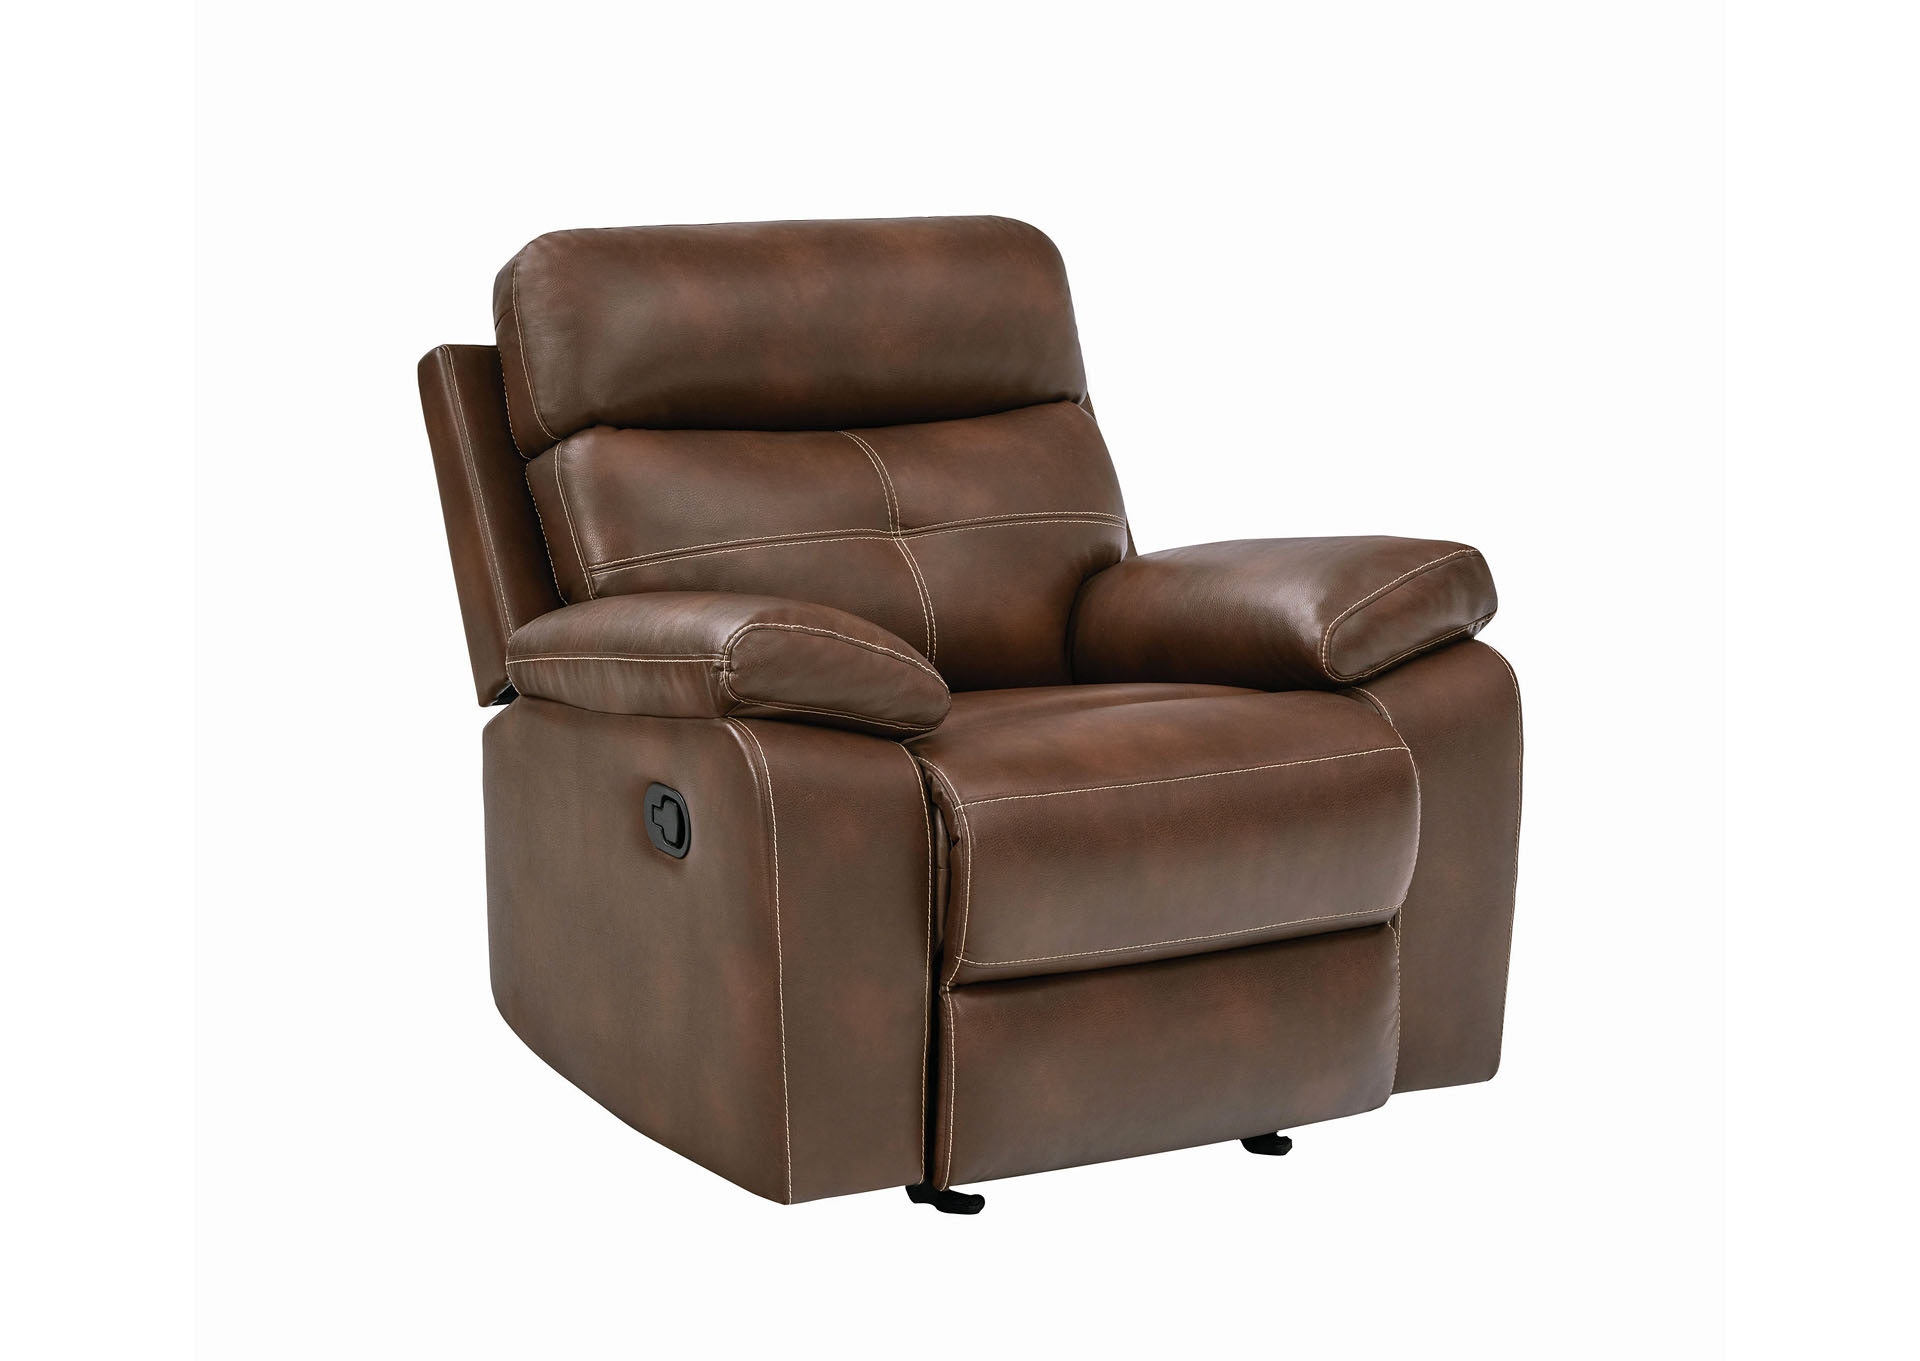 Judge Gray Damiano Brown Faux Leather, Faux Leather Recliner